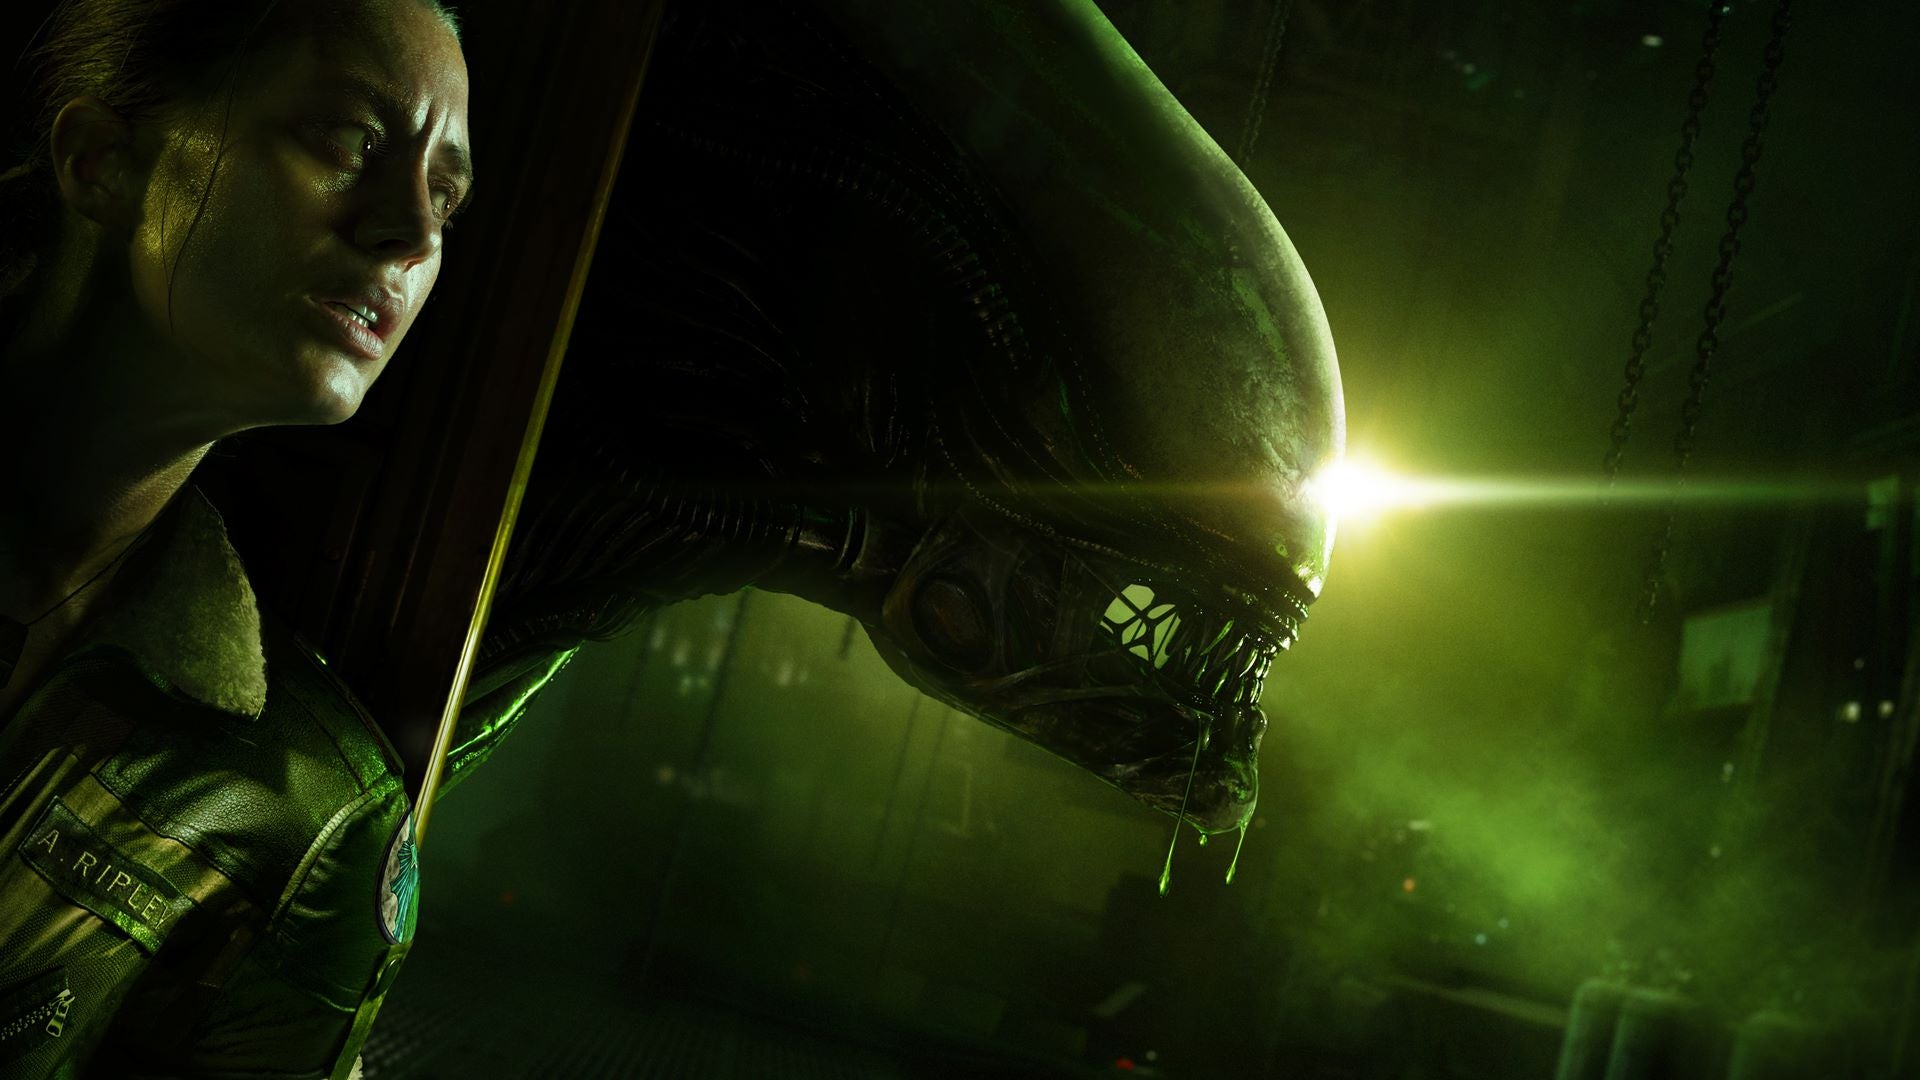 Alien: Isolation is a 2014 survival horror game based on the Alien movie series.